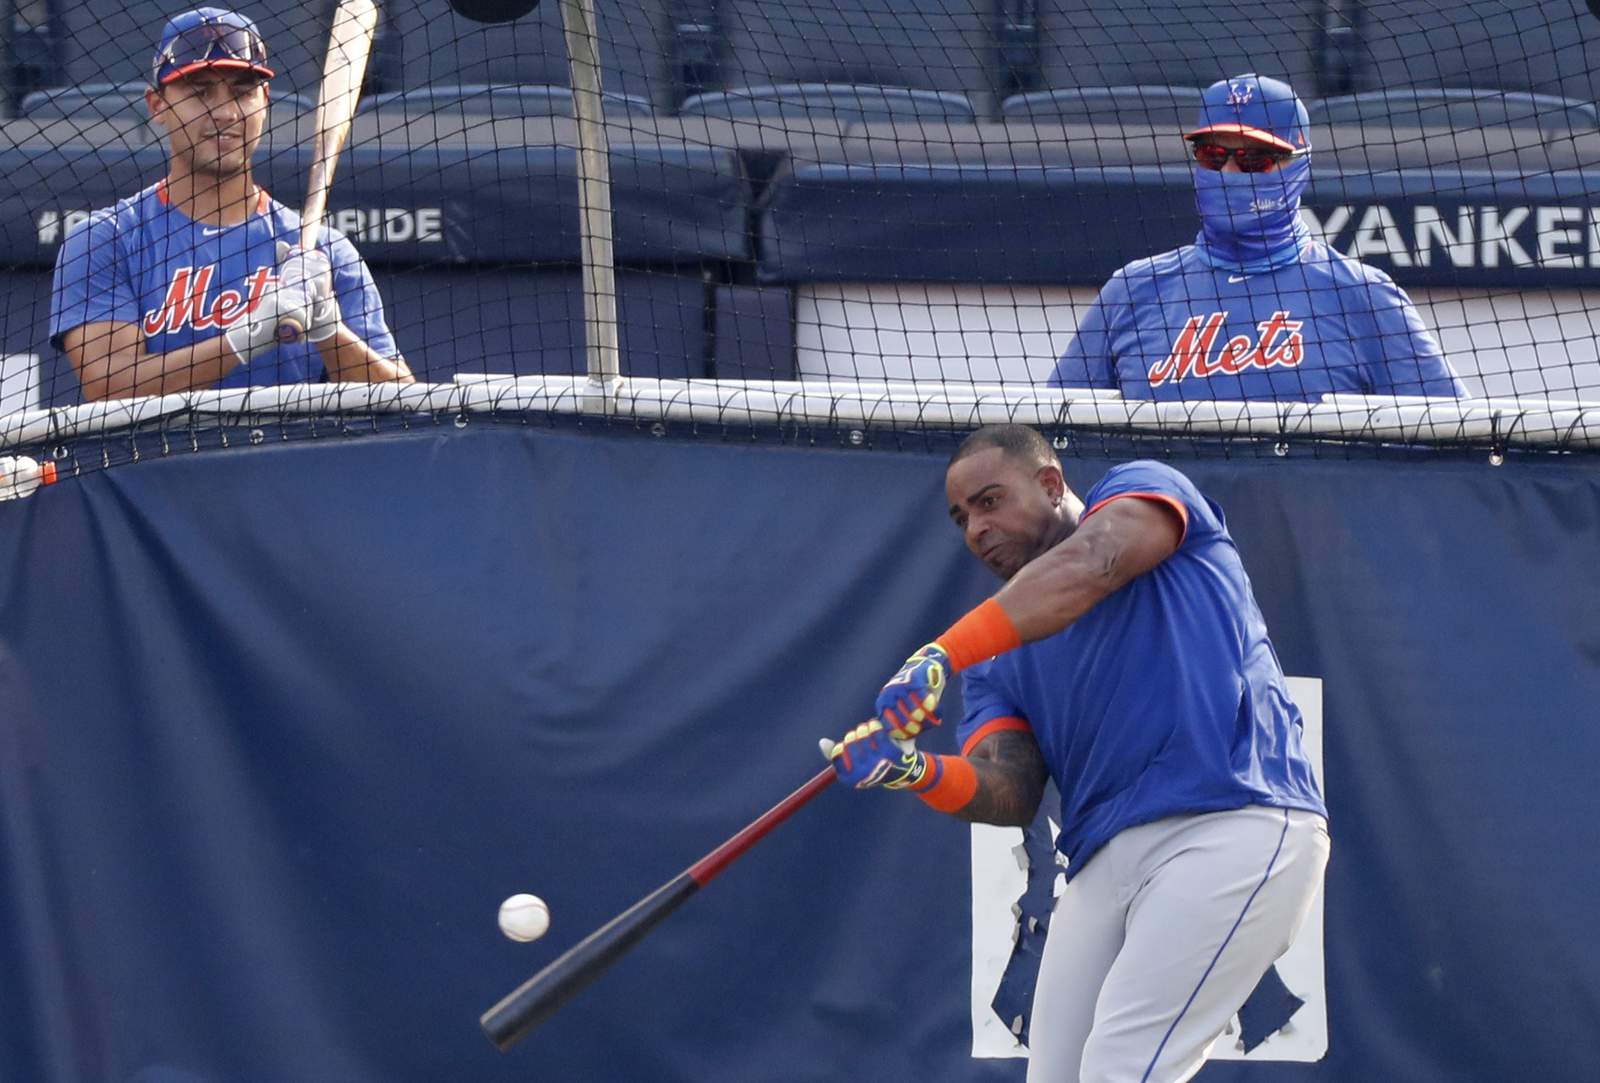 Cspedes expects to be DH for Mets on opening day